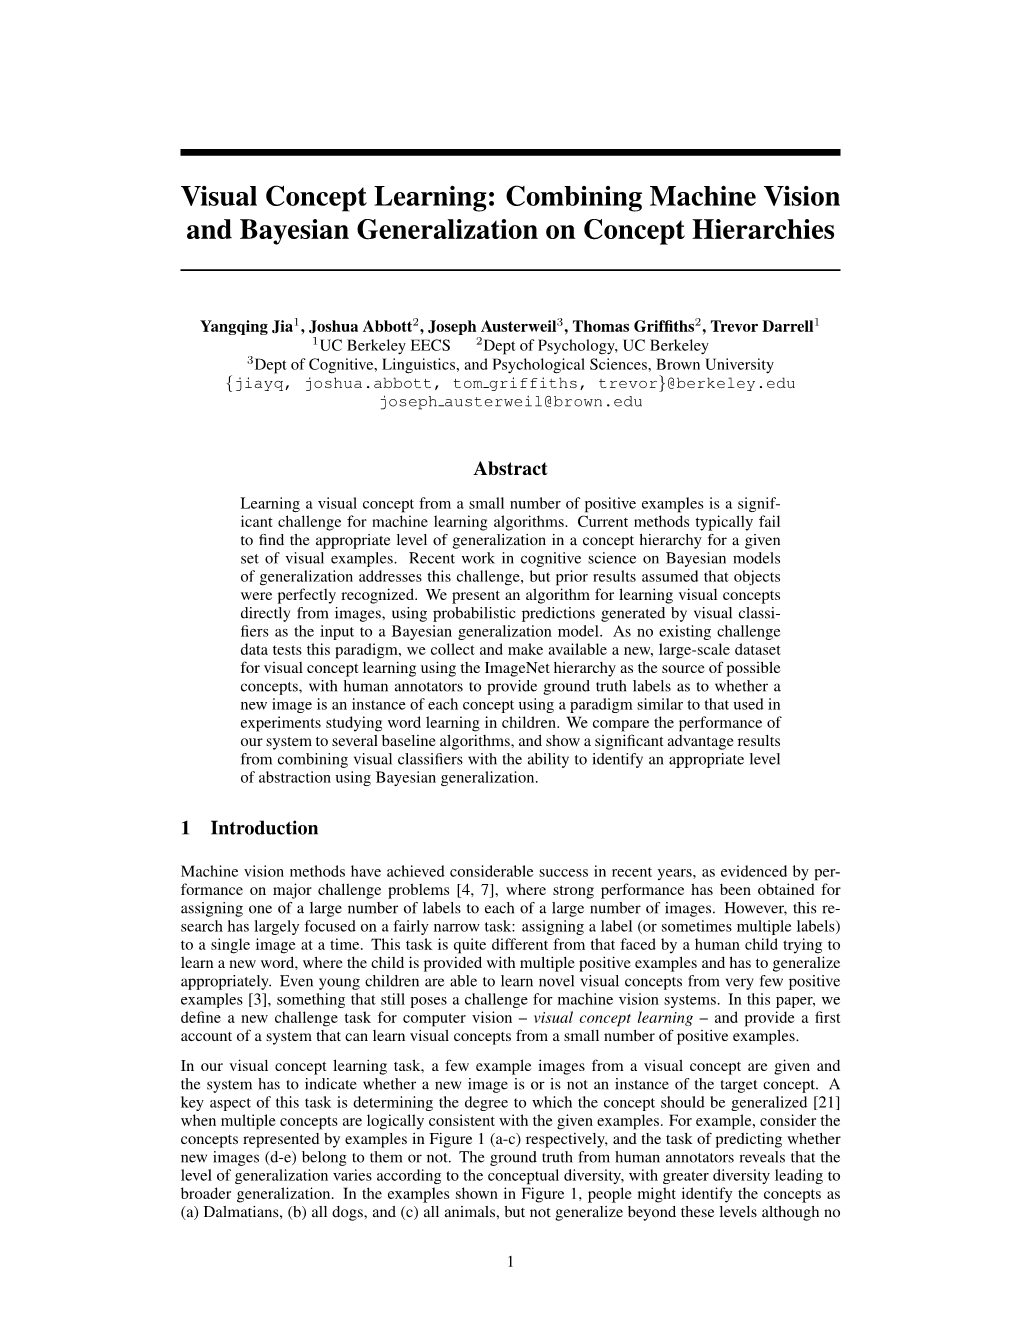 Visual Concept Learning: Combining Machine Vision and Bayesian Generalization on Concept Hierarchies